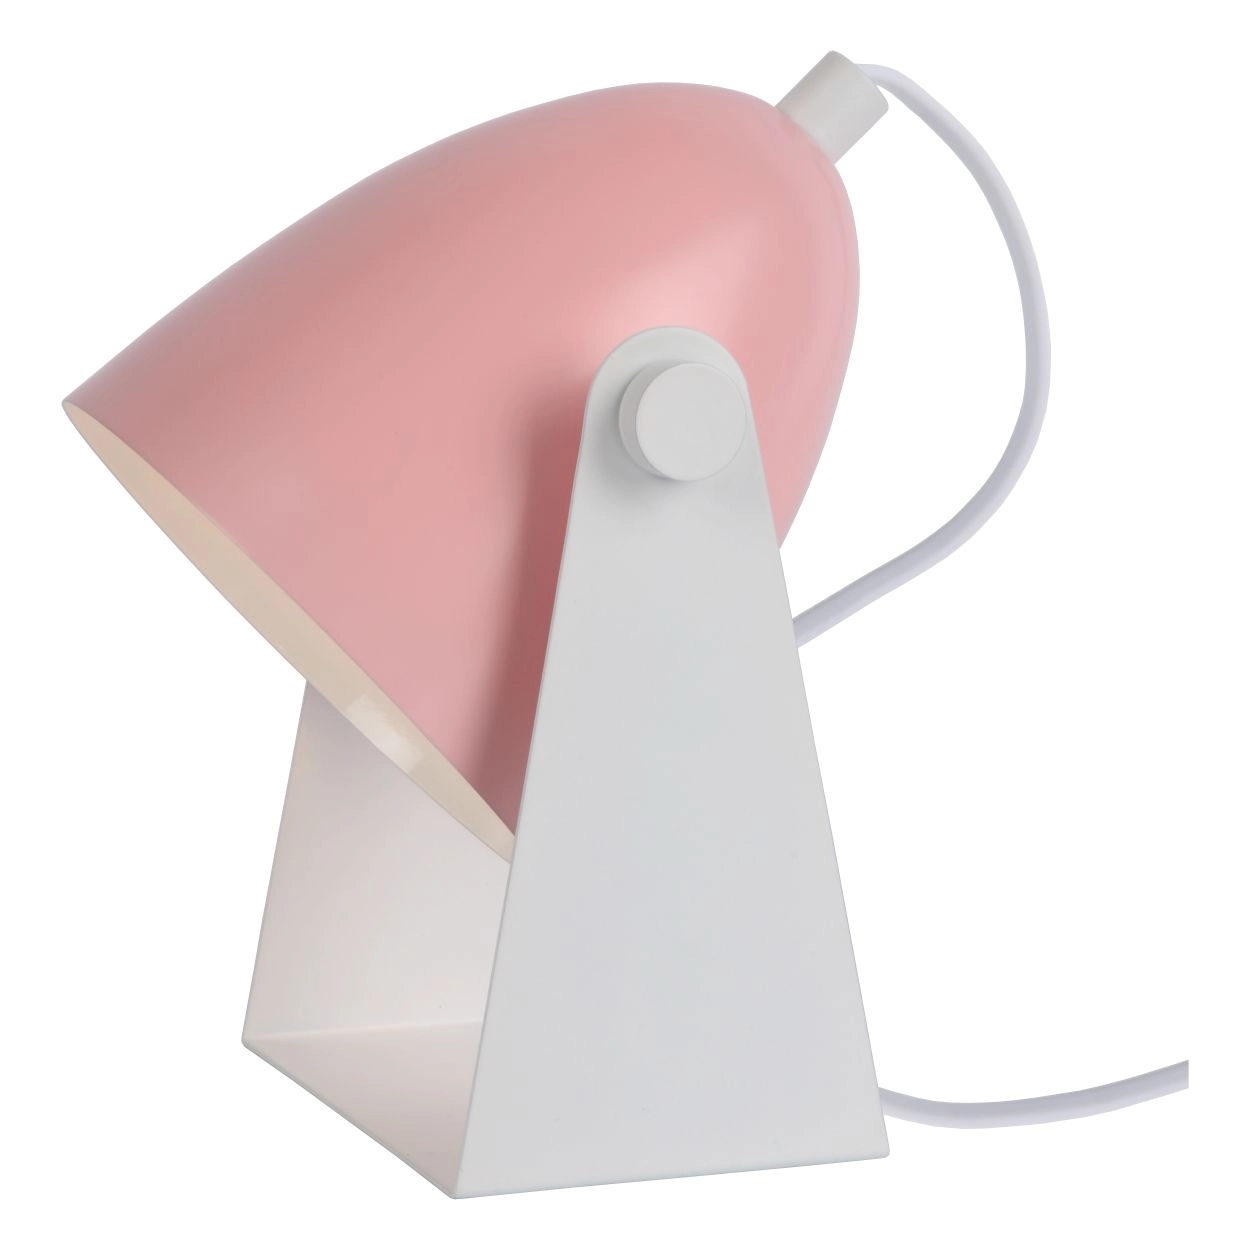 LU 45564/01/66 Lucide CHAGO - Table lamp - 1xE14 - Pink